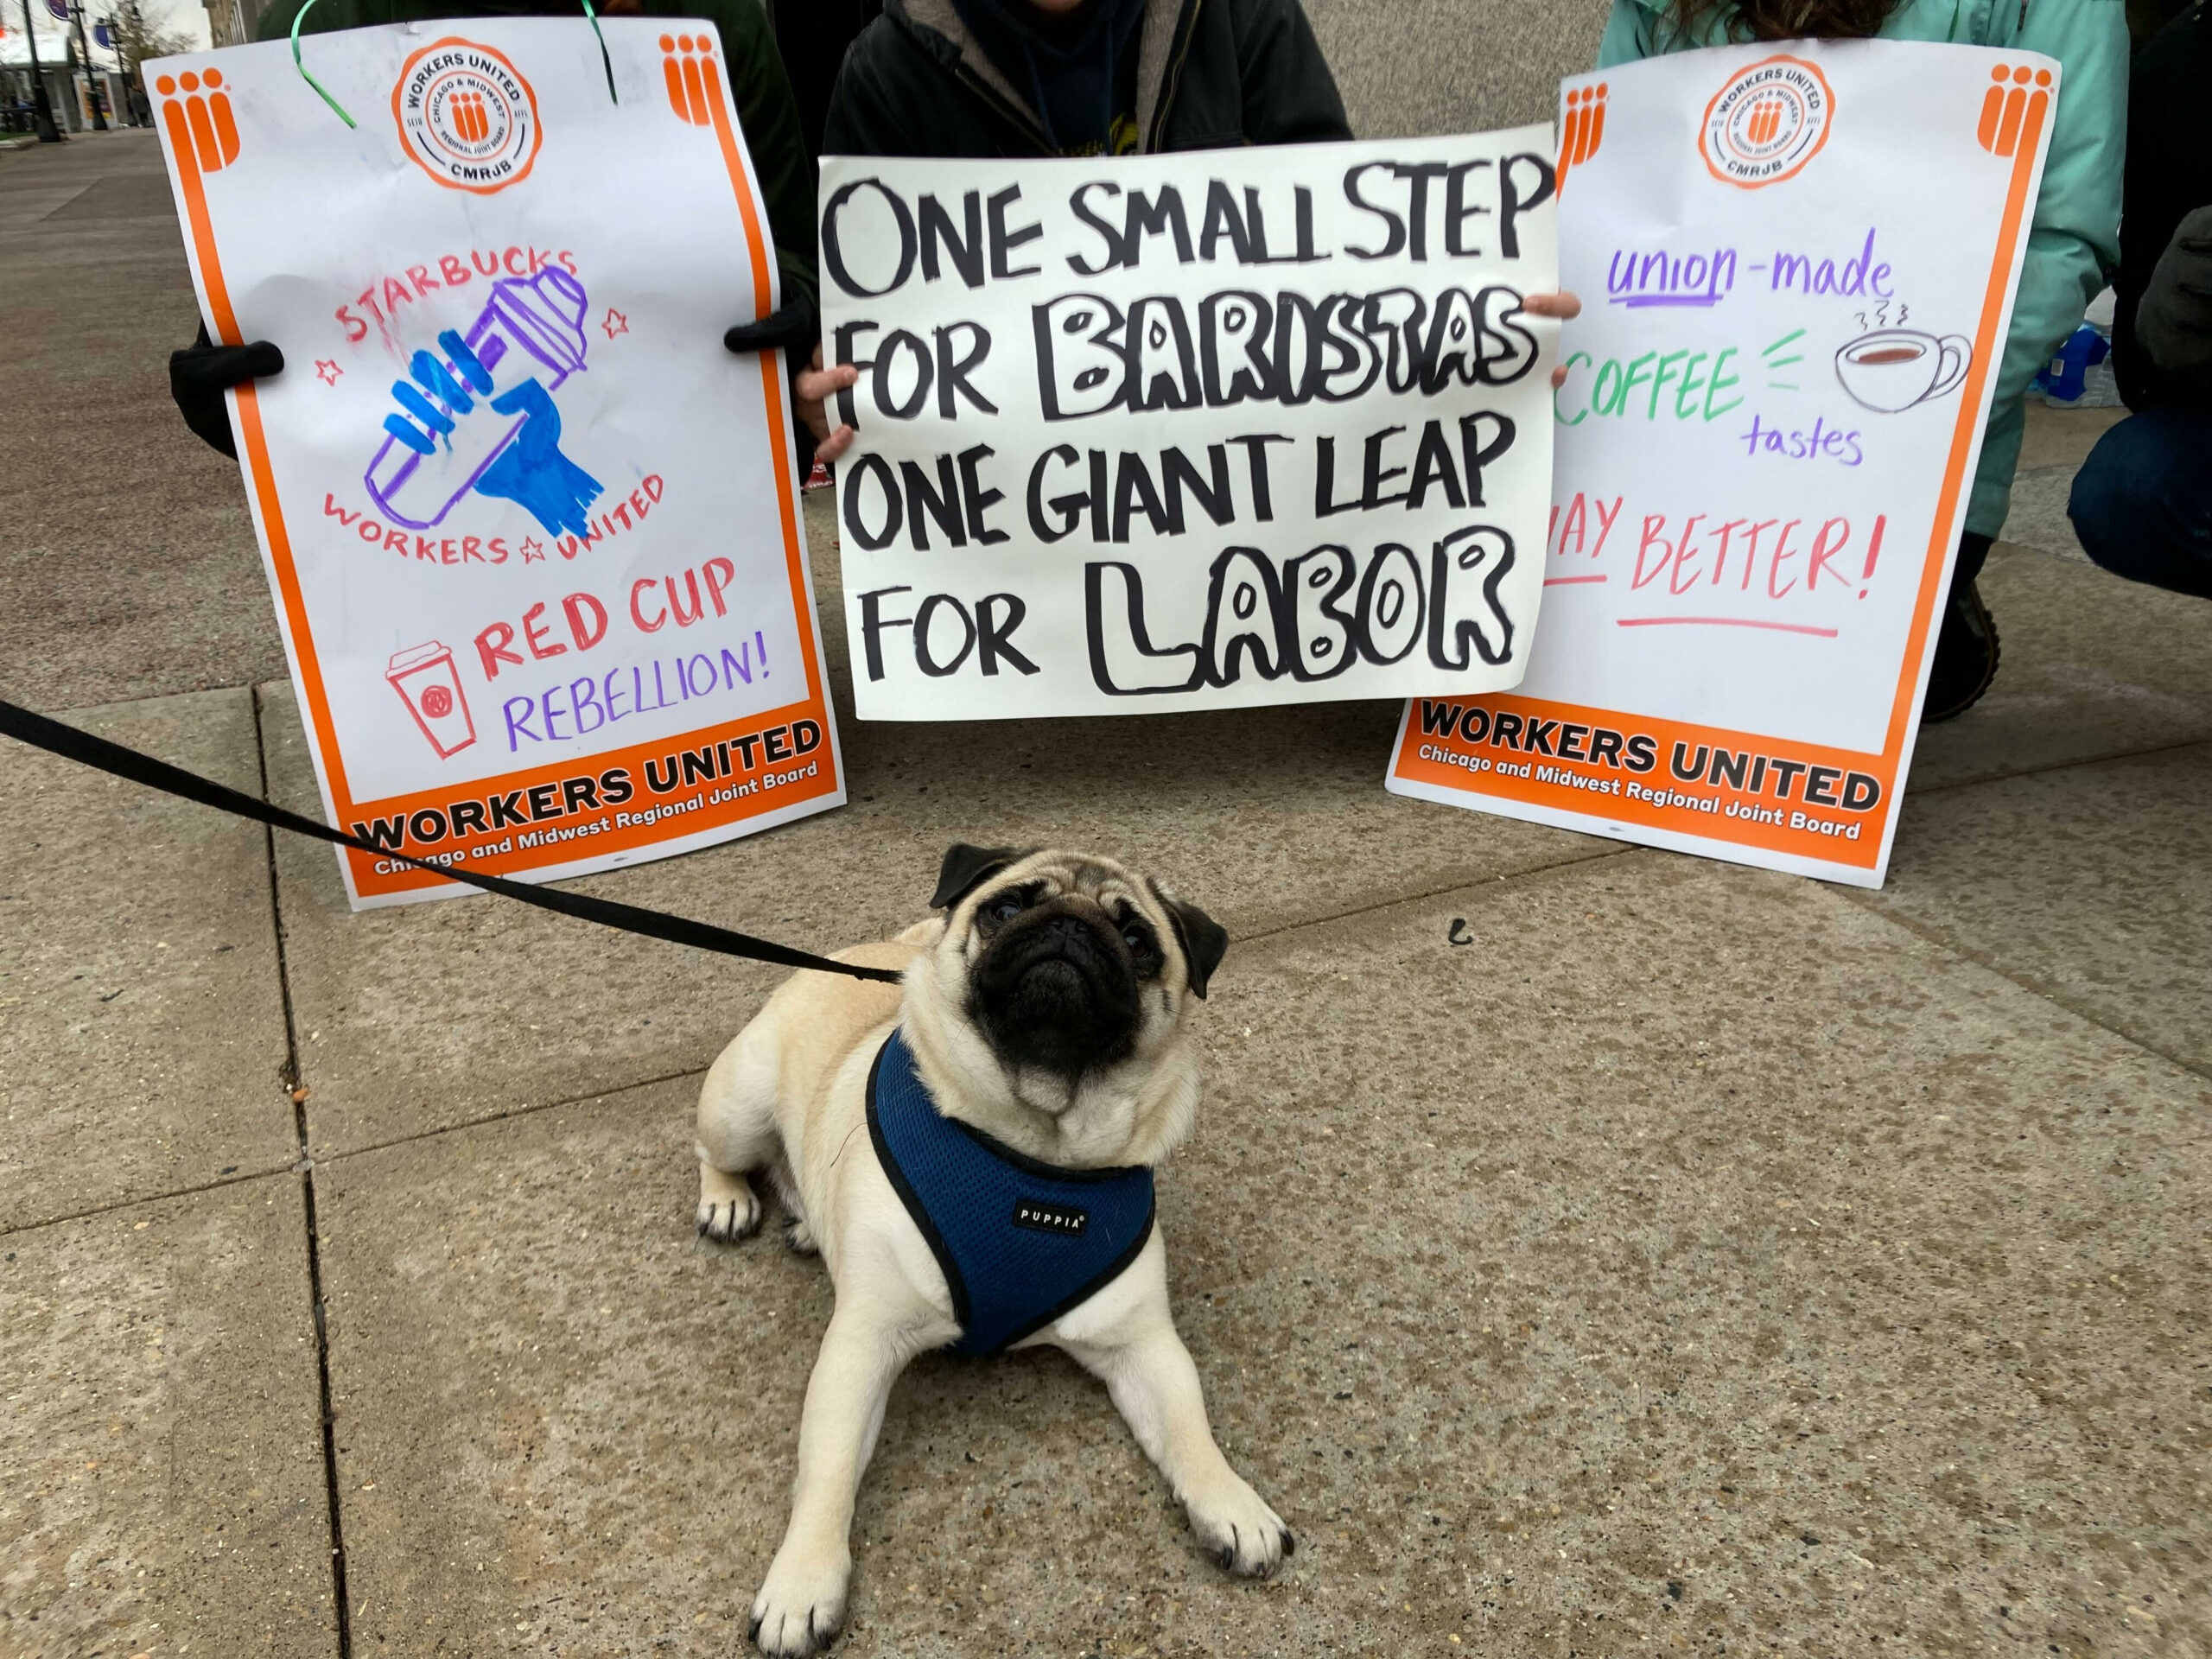 A pug on a leash sits in front of three picketers, whose faces are not shown and who are bending down holding picket signs. Two printed signs that read, “WORKERS UNITED Chicago and Midwest Regional Joint Board” feature the hand-written words, “STARBUCKS WORKERS UNITED RED CUP REBELLION, Workers united ” with a drawing of a hand holding a coffee cup. The middle sign reads, “ONE SMALL STEP FOR BARISTAS, ONE GIANT LEAP FOR LABOR, with the words “BARISTAS” and “LABOR” written in bubble letters.